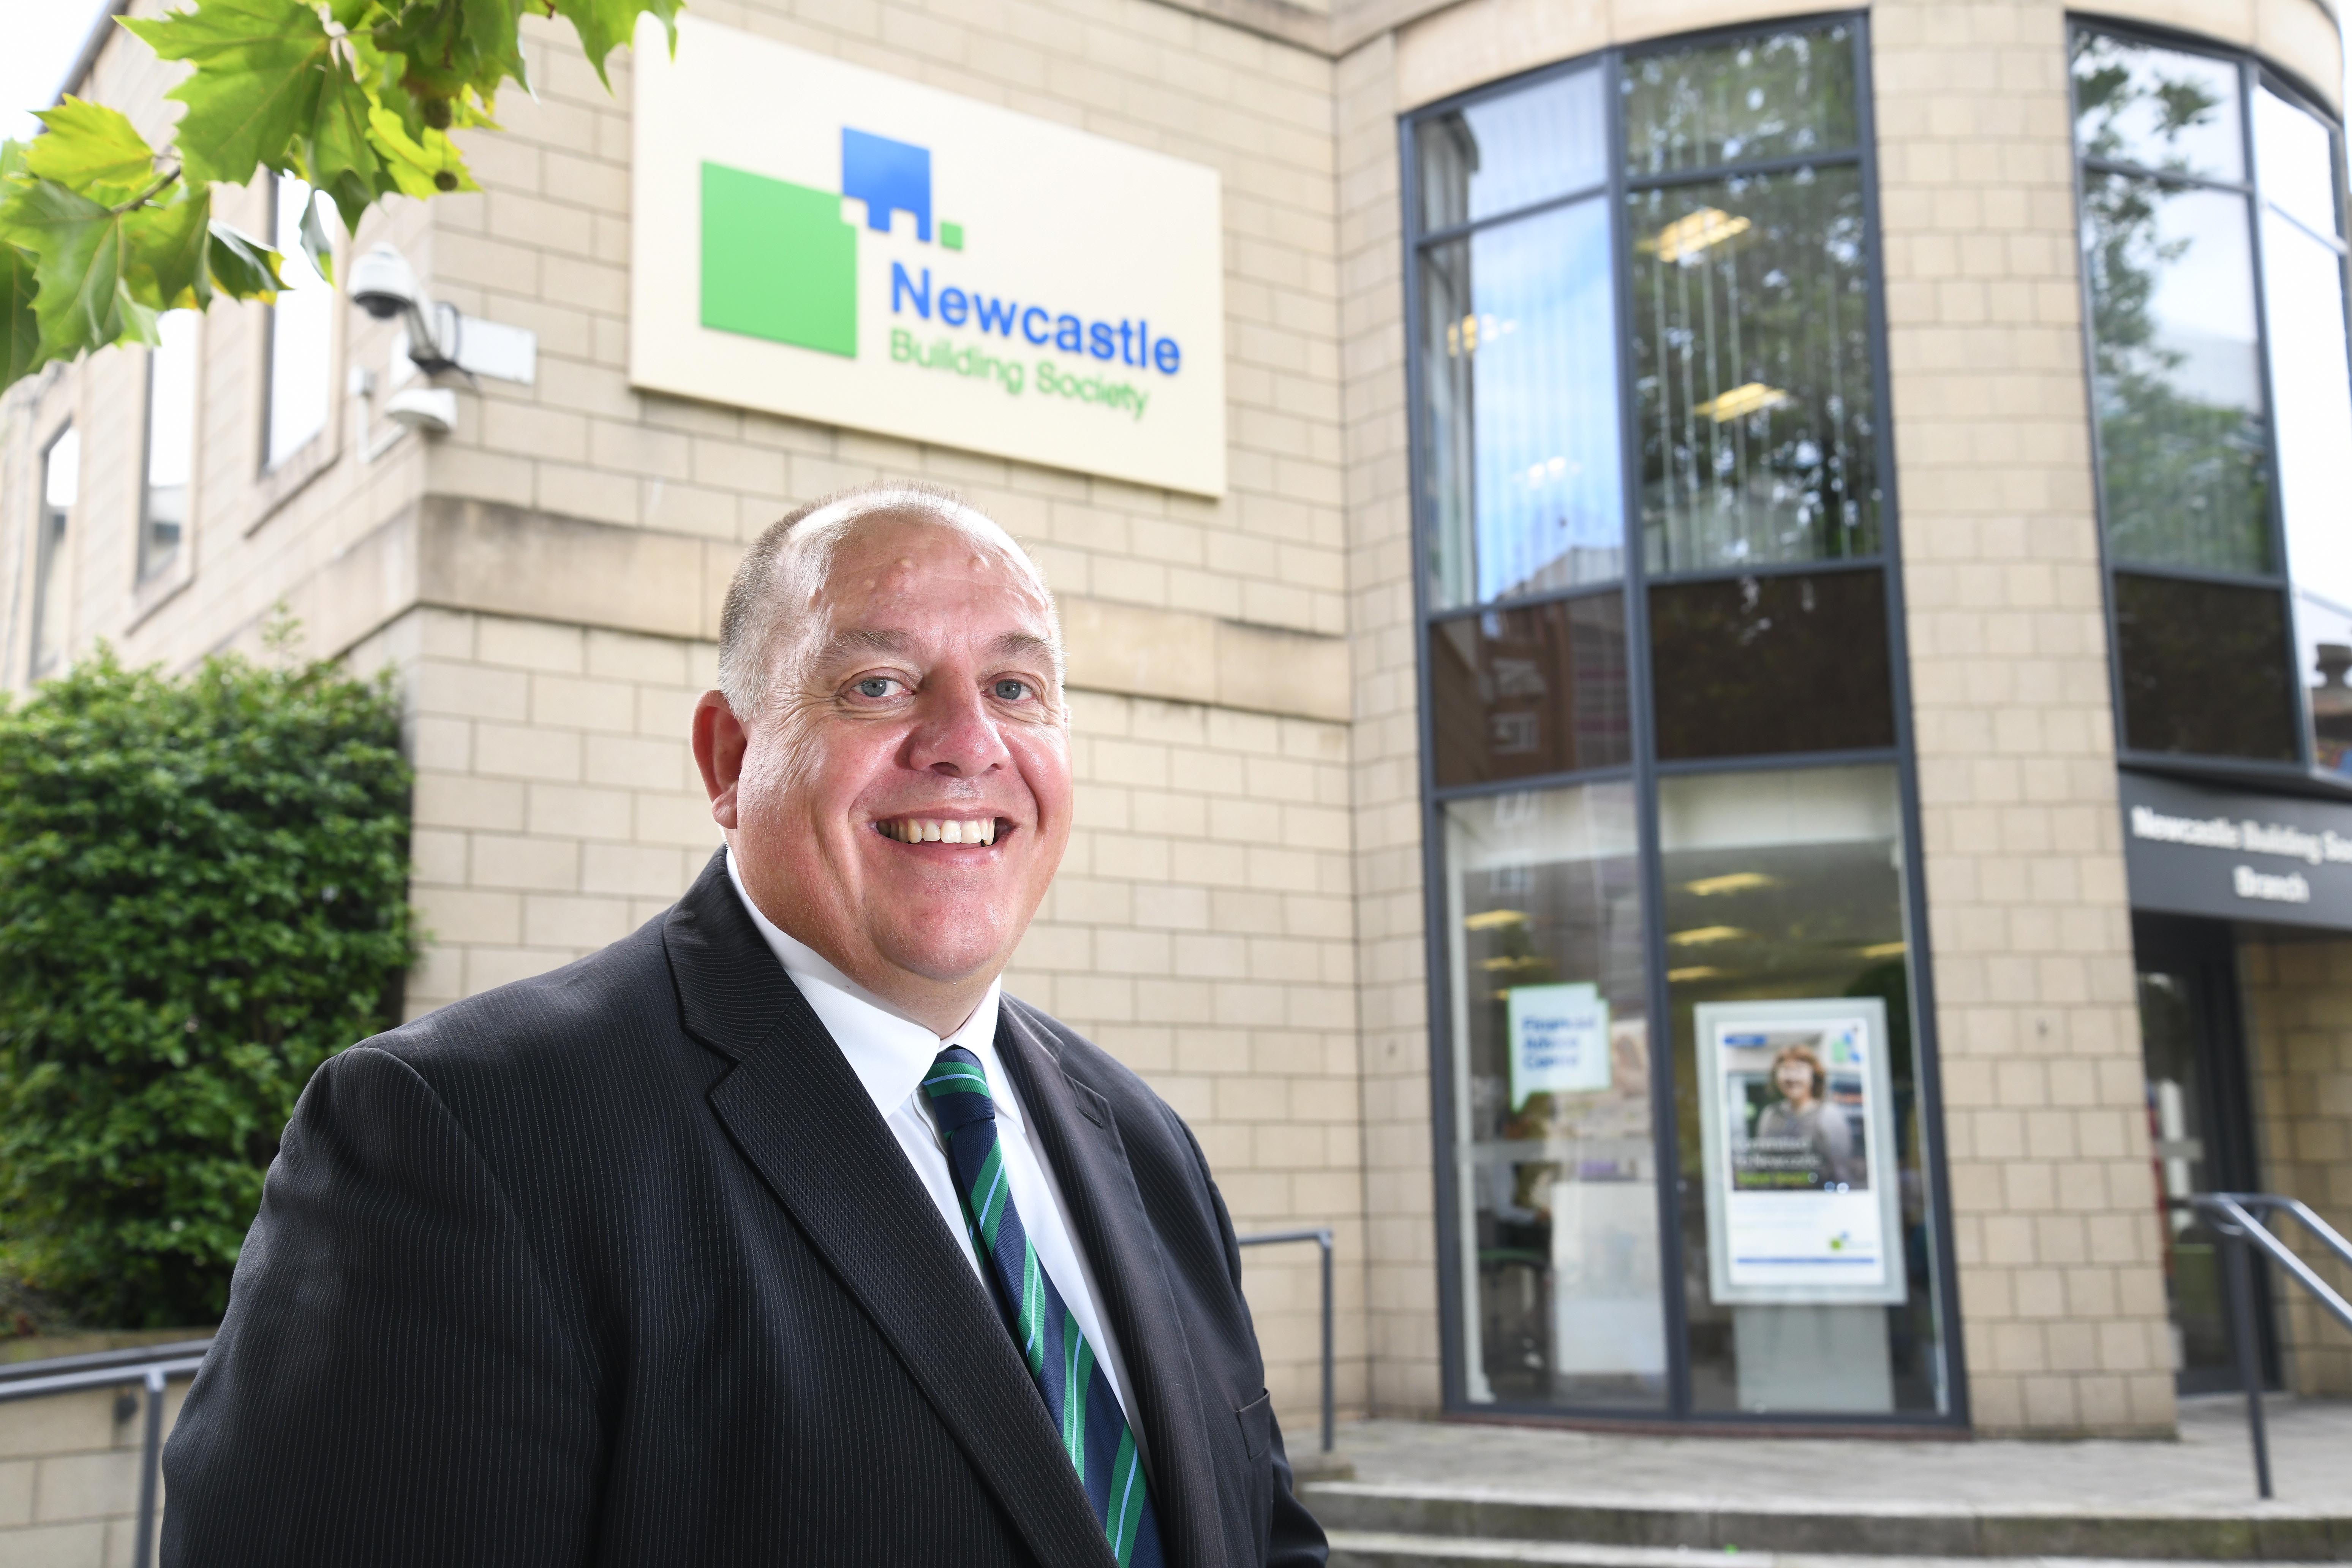 John Truswell to leave Newcastle Building Society